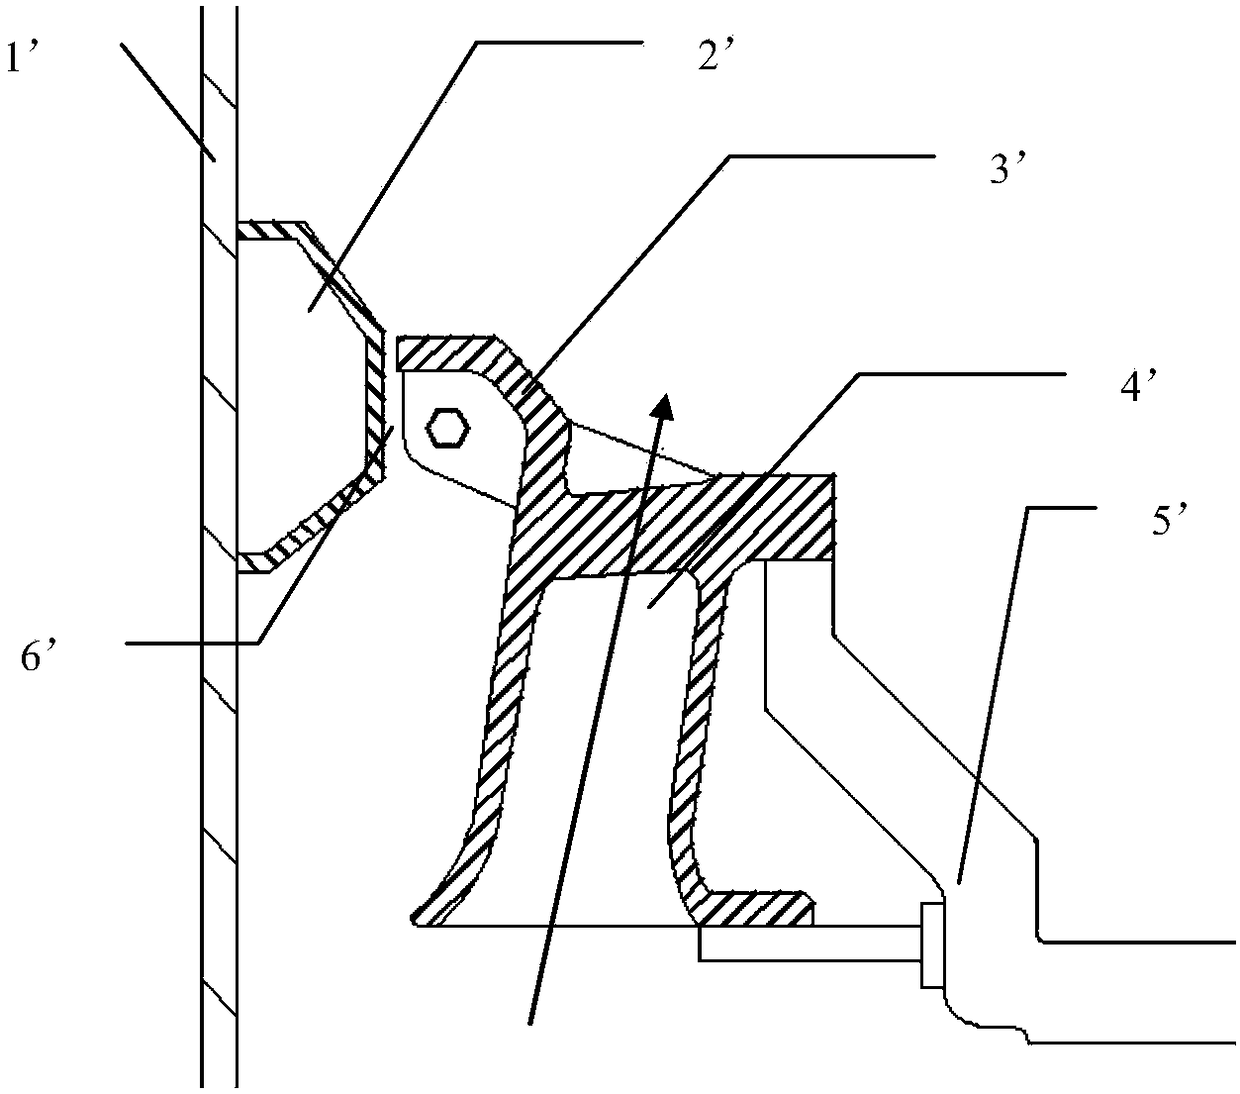 Rotary nozzle structure of medium-speed coal mill